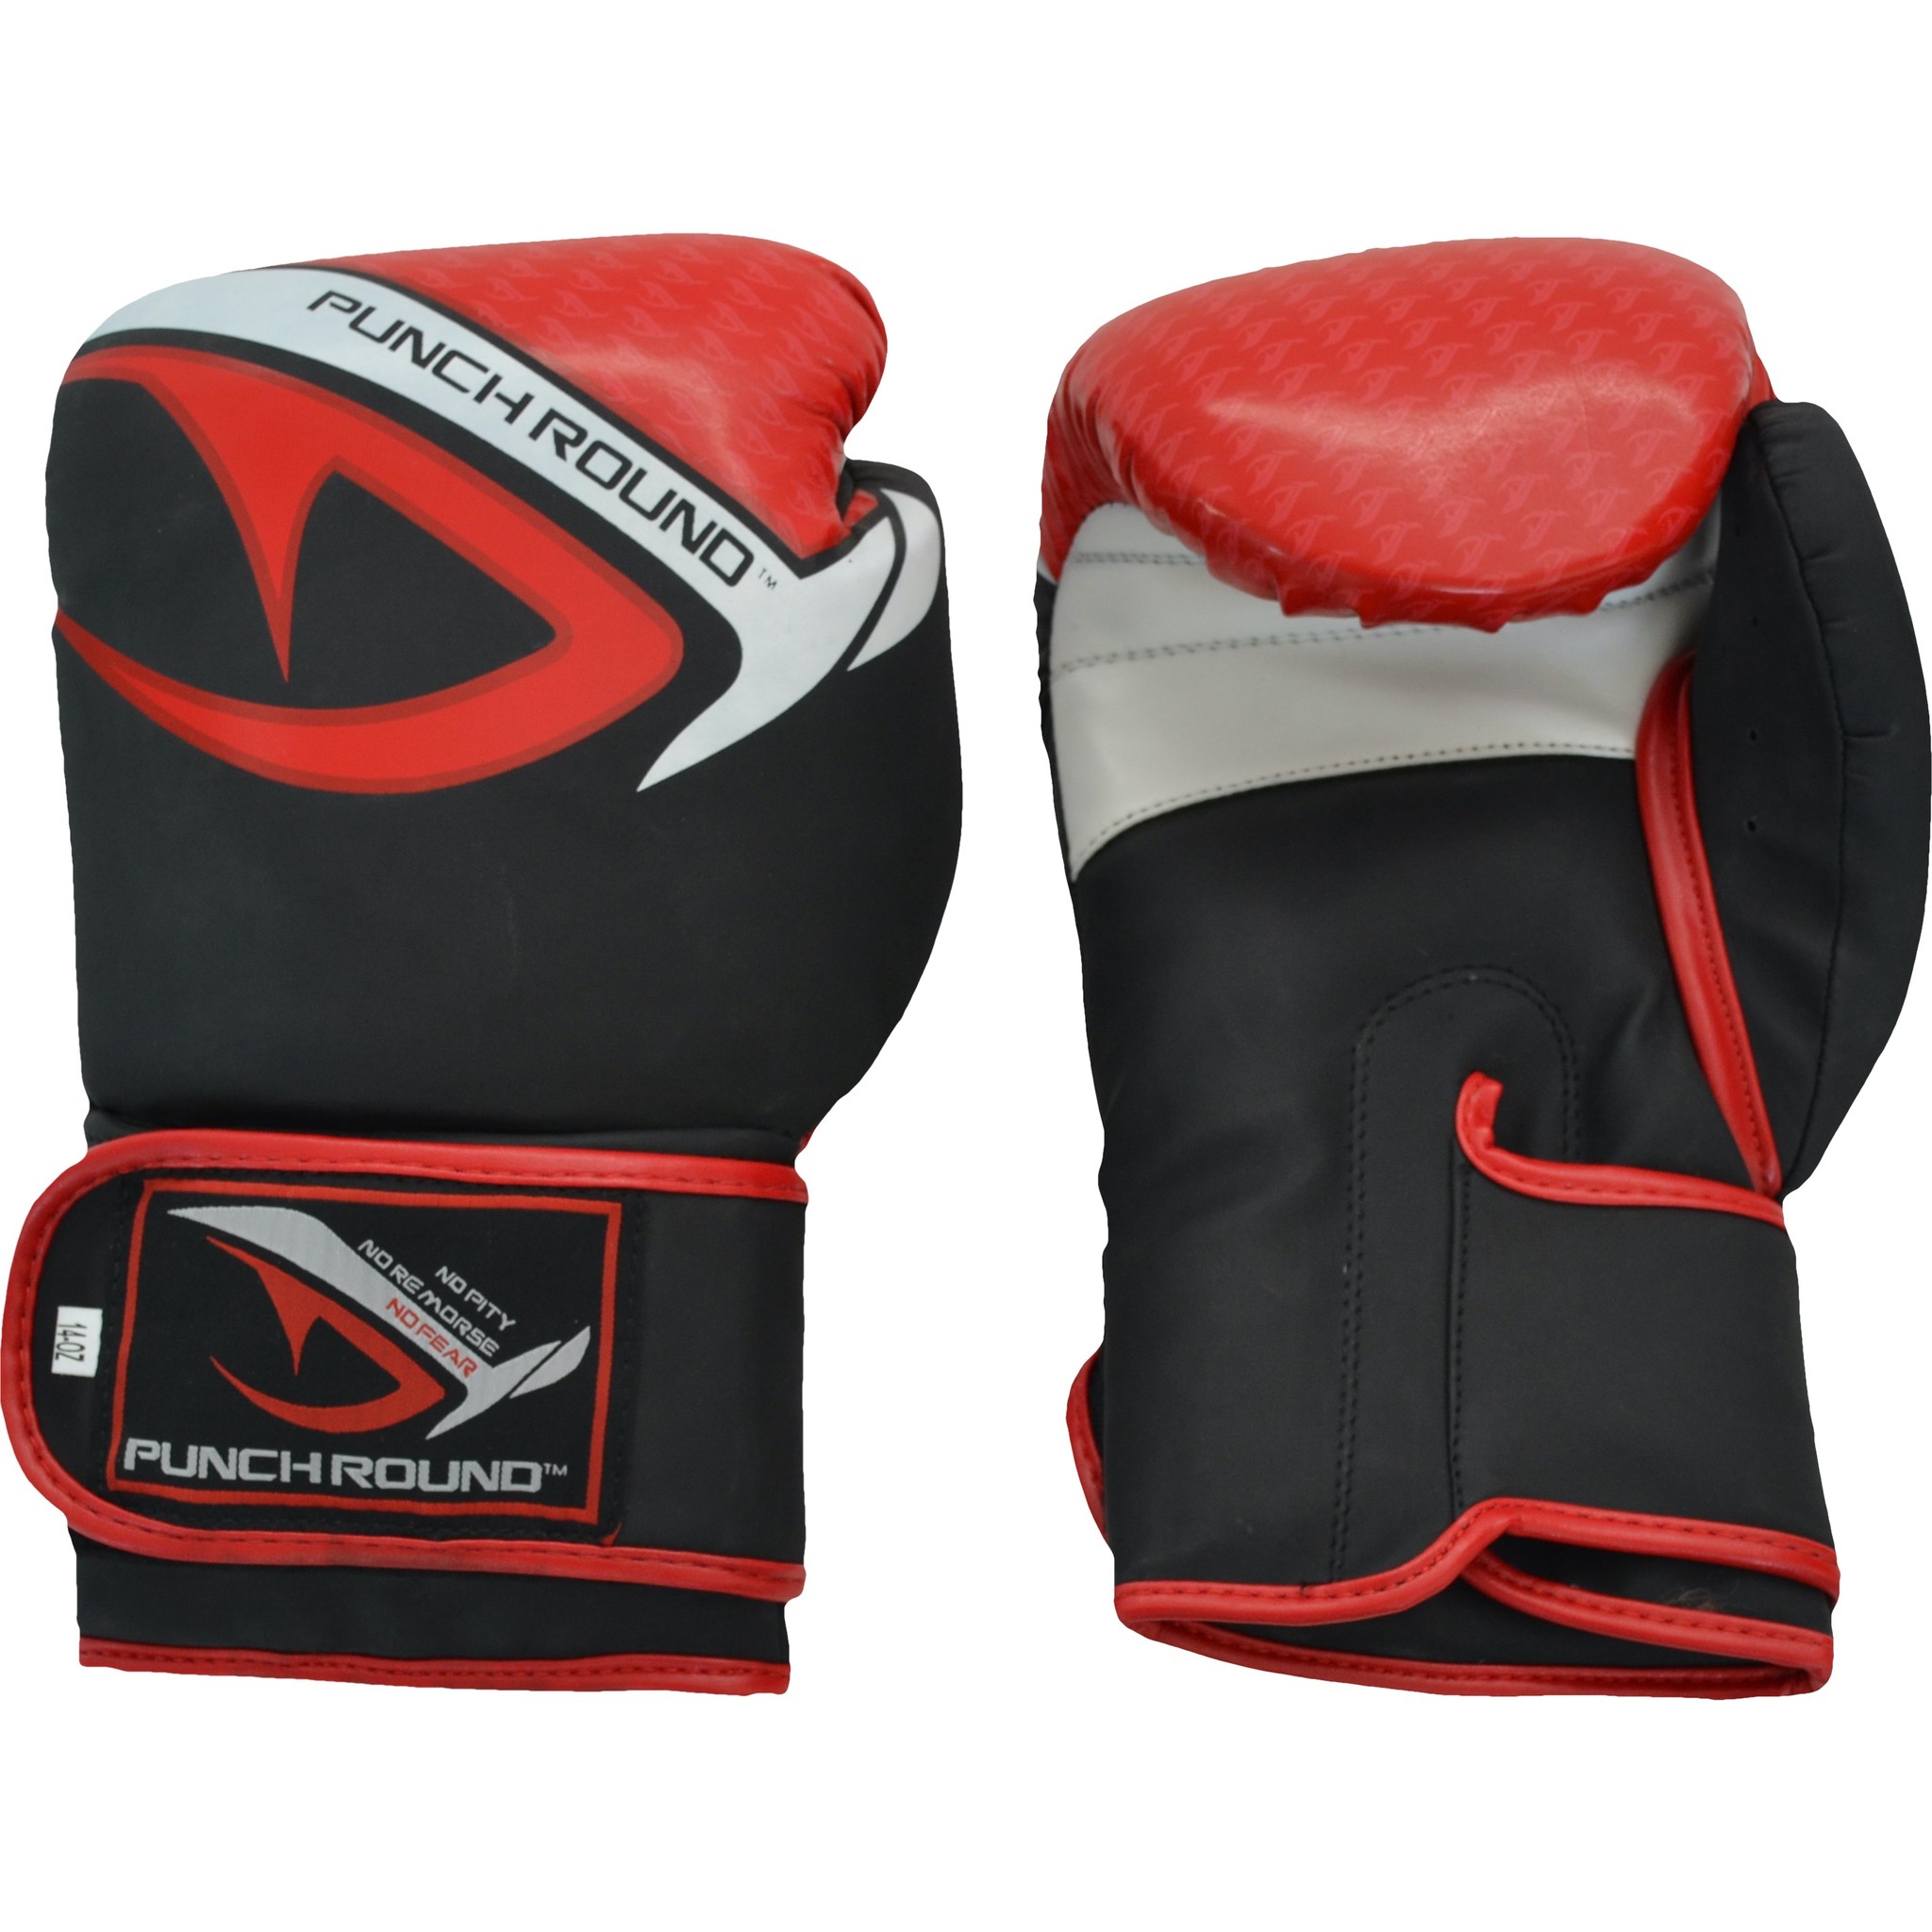 17+ Black And Red Boxing Gloves